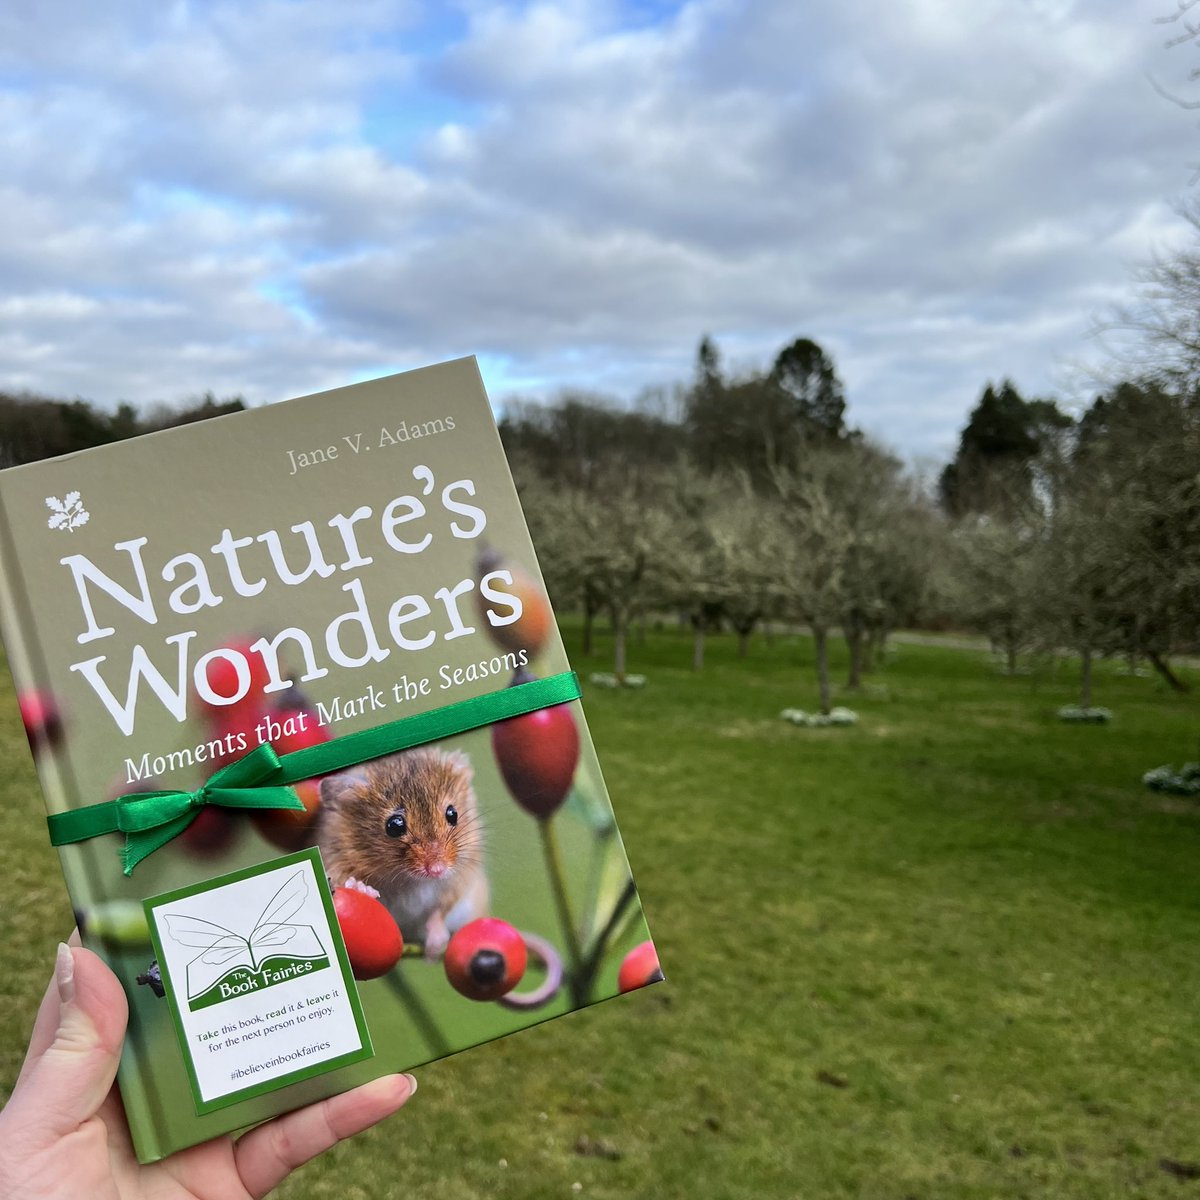 The Book Fairies are celebrating Nature’s Wonders today! This National Trust book by Jane V. Adams will make readers see Spring in a magical way! #ibelieveinbookfairies #TBFCollins #TBFNaturesWonders #NTNaturePoems #NationalTrust #BookFairiesinBloom #Falkirk #BookFairiesFalkirk